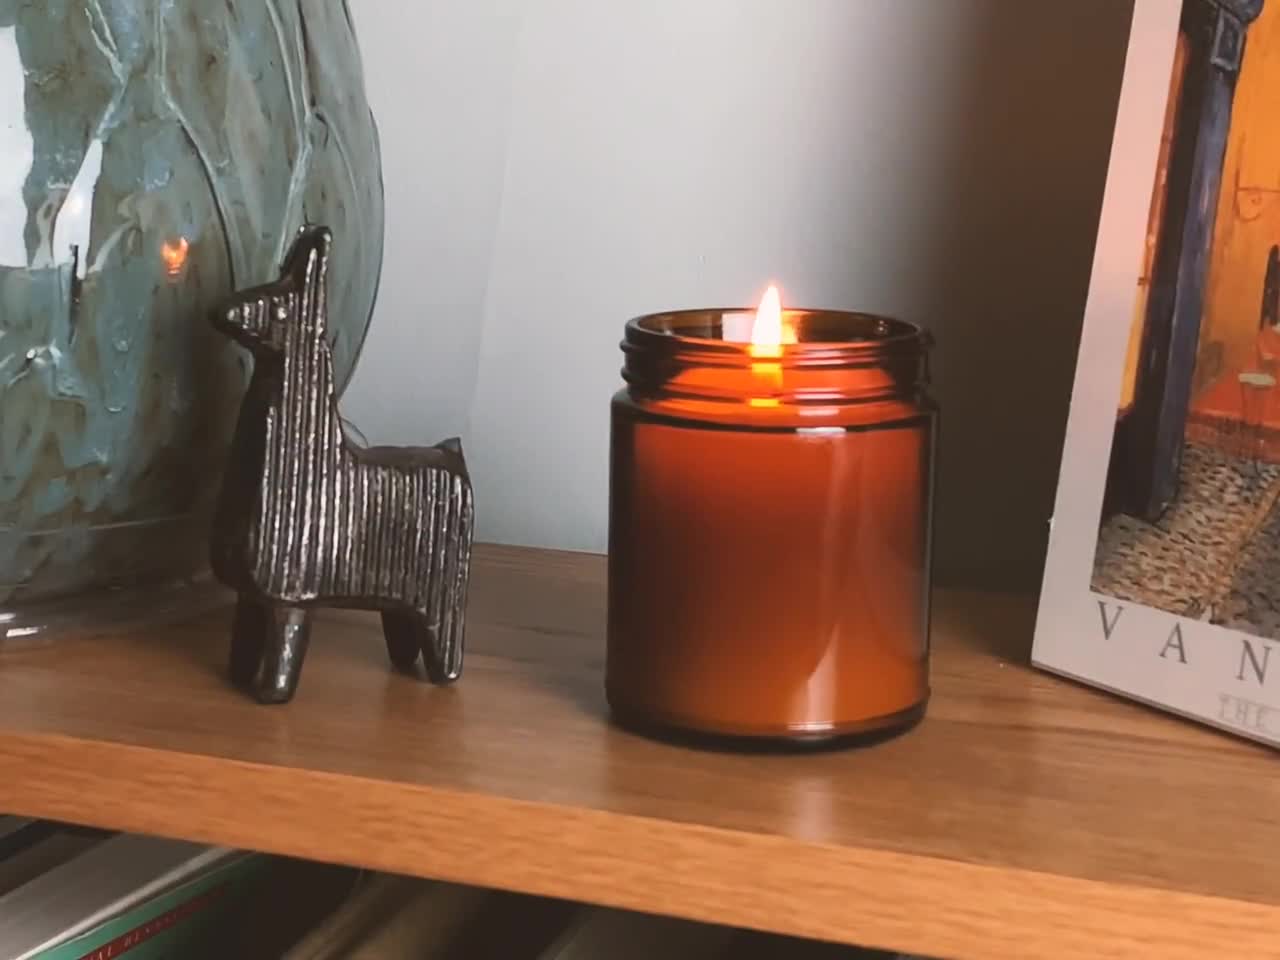 Teakwood and Tobacco Scented Beeswax Candles in Amber Glass, Fall